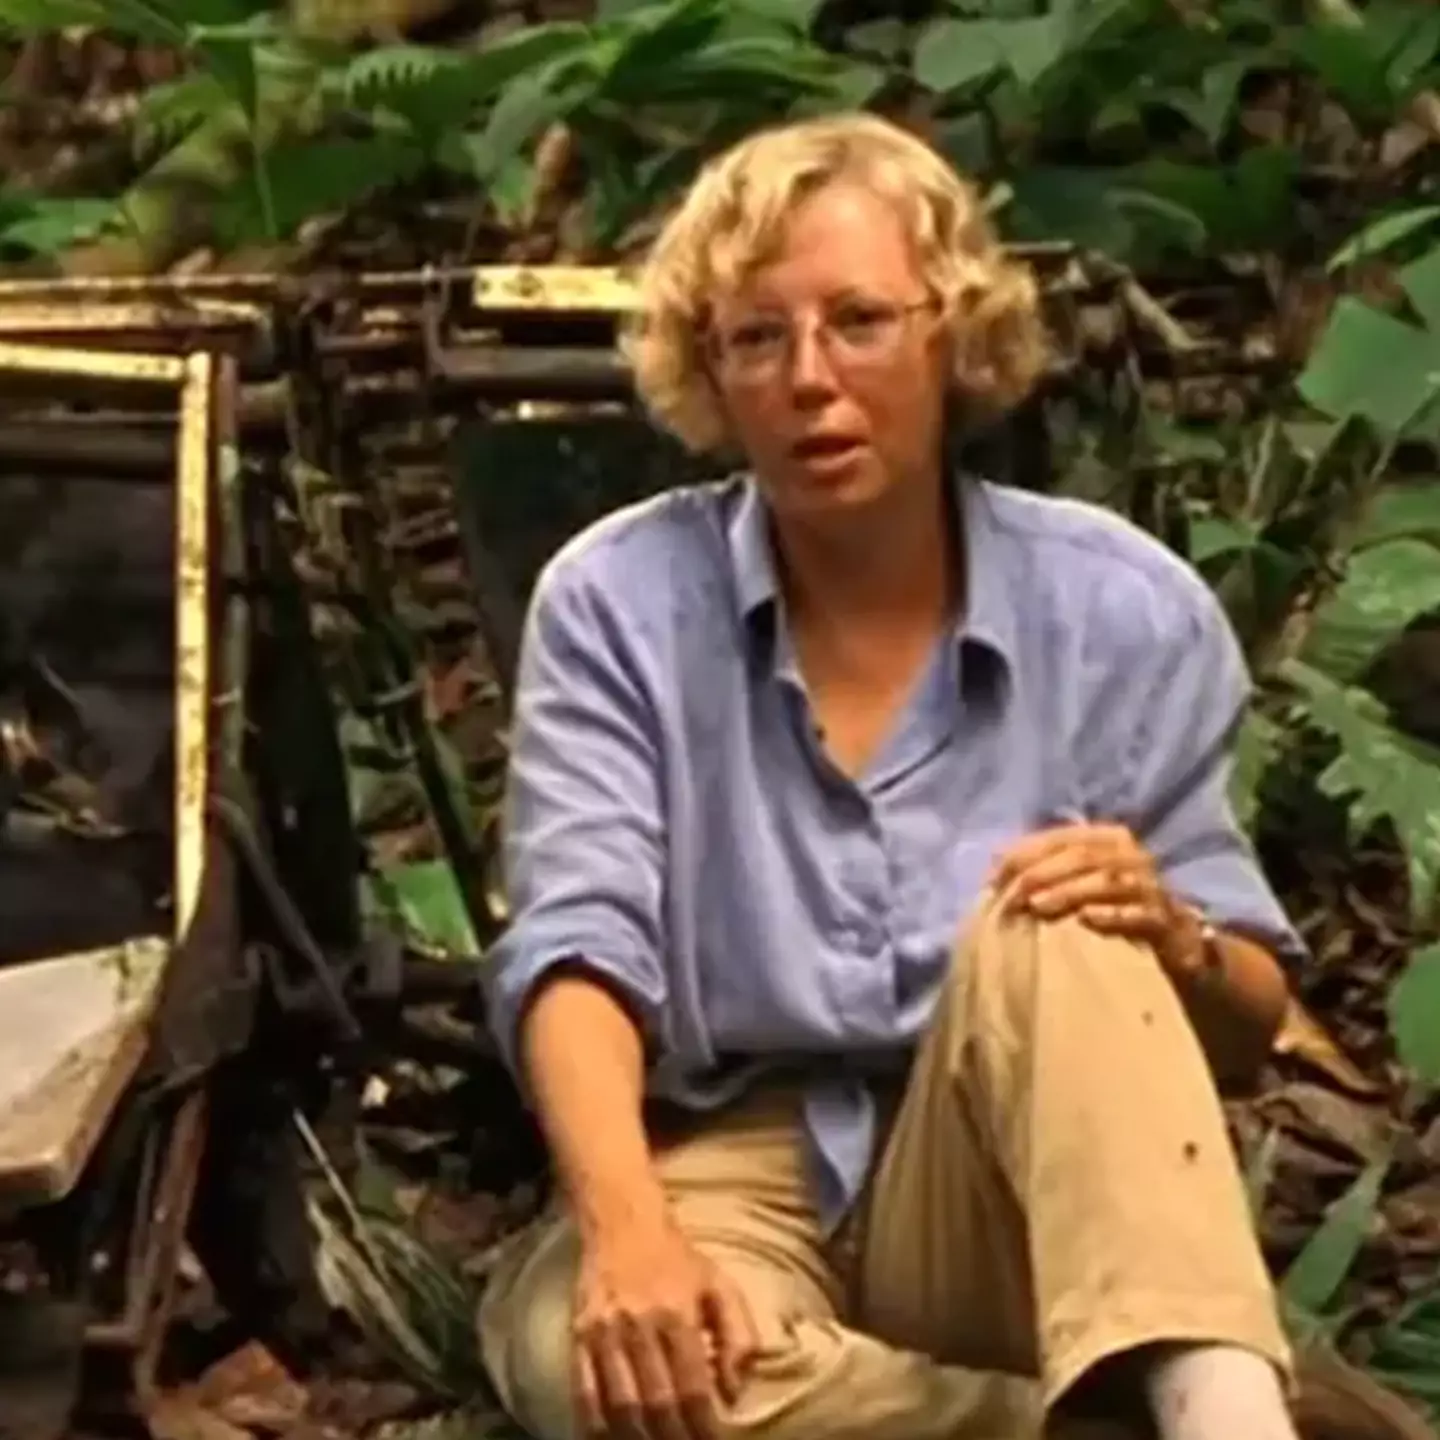 How teen girl survived 11 days in the Amazon Rainforest after a plane crash in 1971